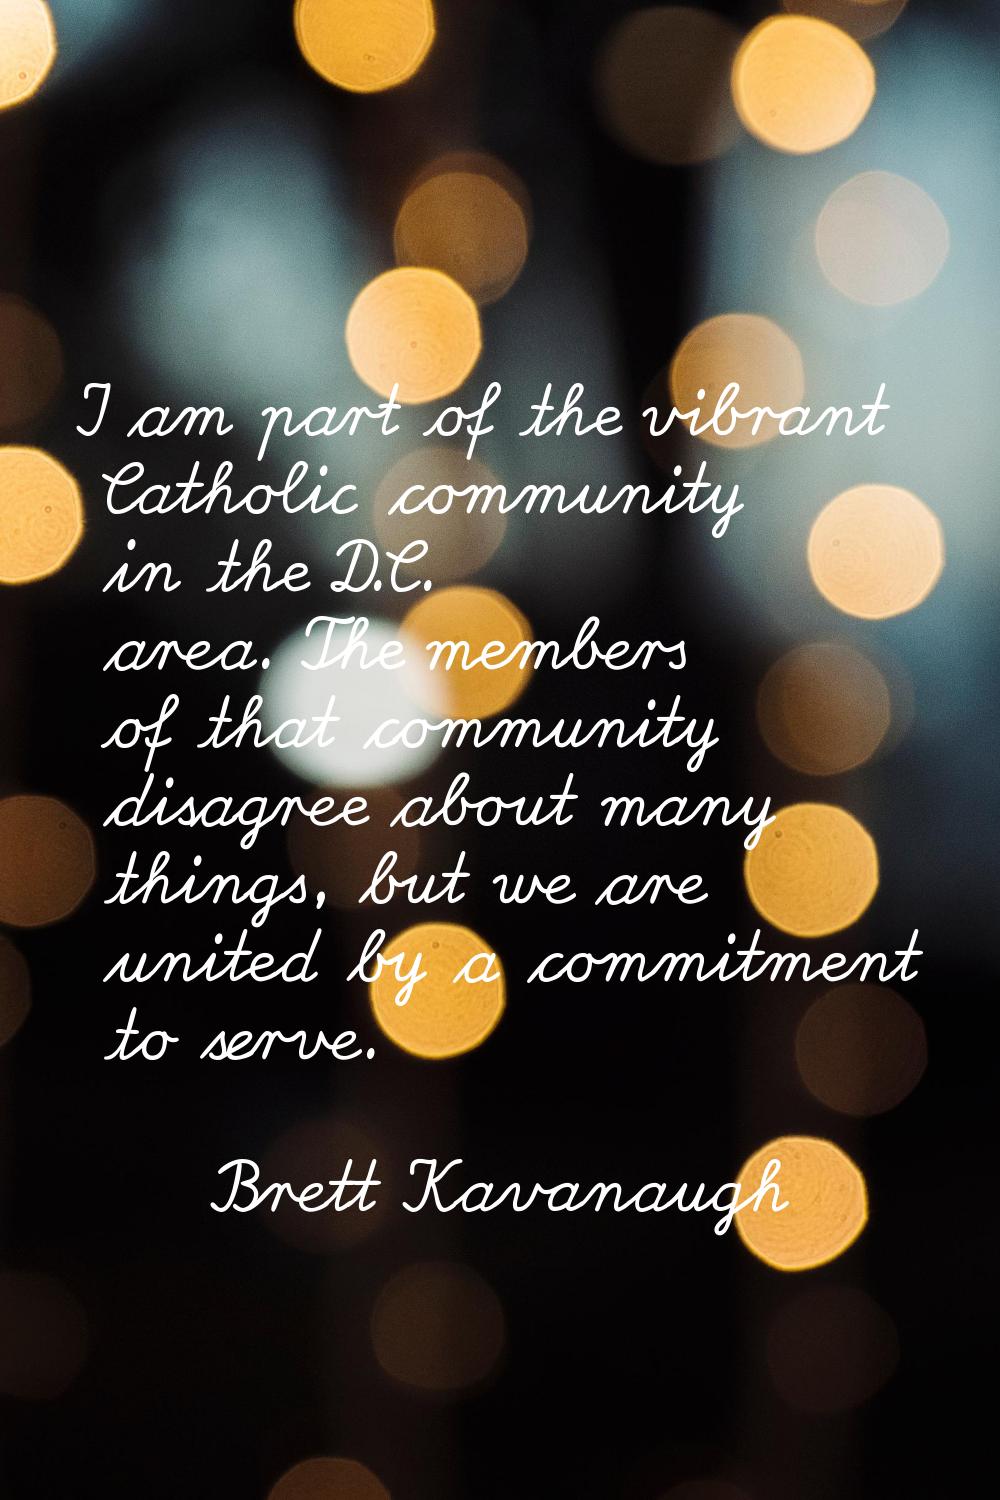 I am part of the vibrant Catholic community in the D.C. area. The members of that community disagre